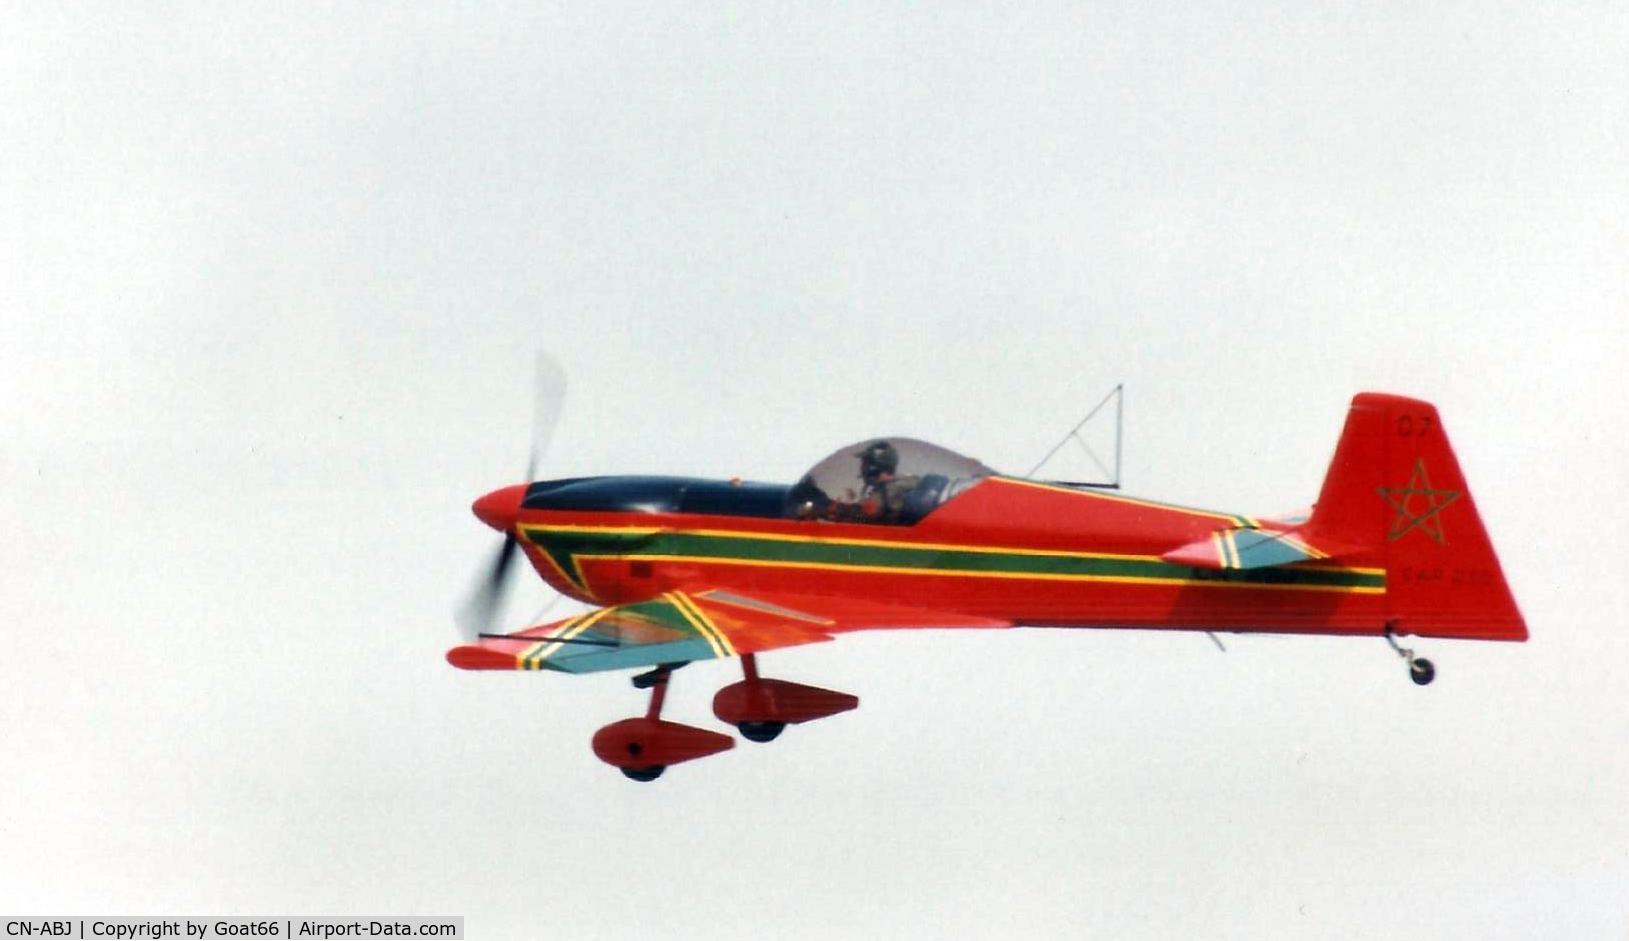 CN-ABJ, Mudry CAP-231 C/N 07, A member of the Moroccan AF display team seen participating in IAT 89, RAF Fairford July 1989